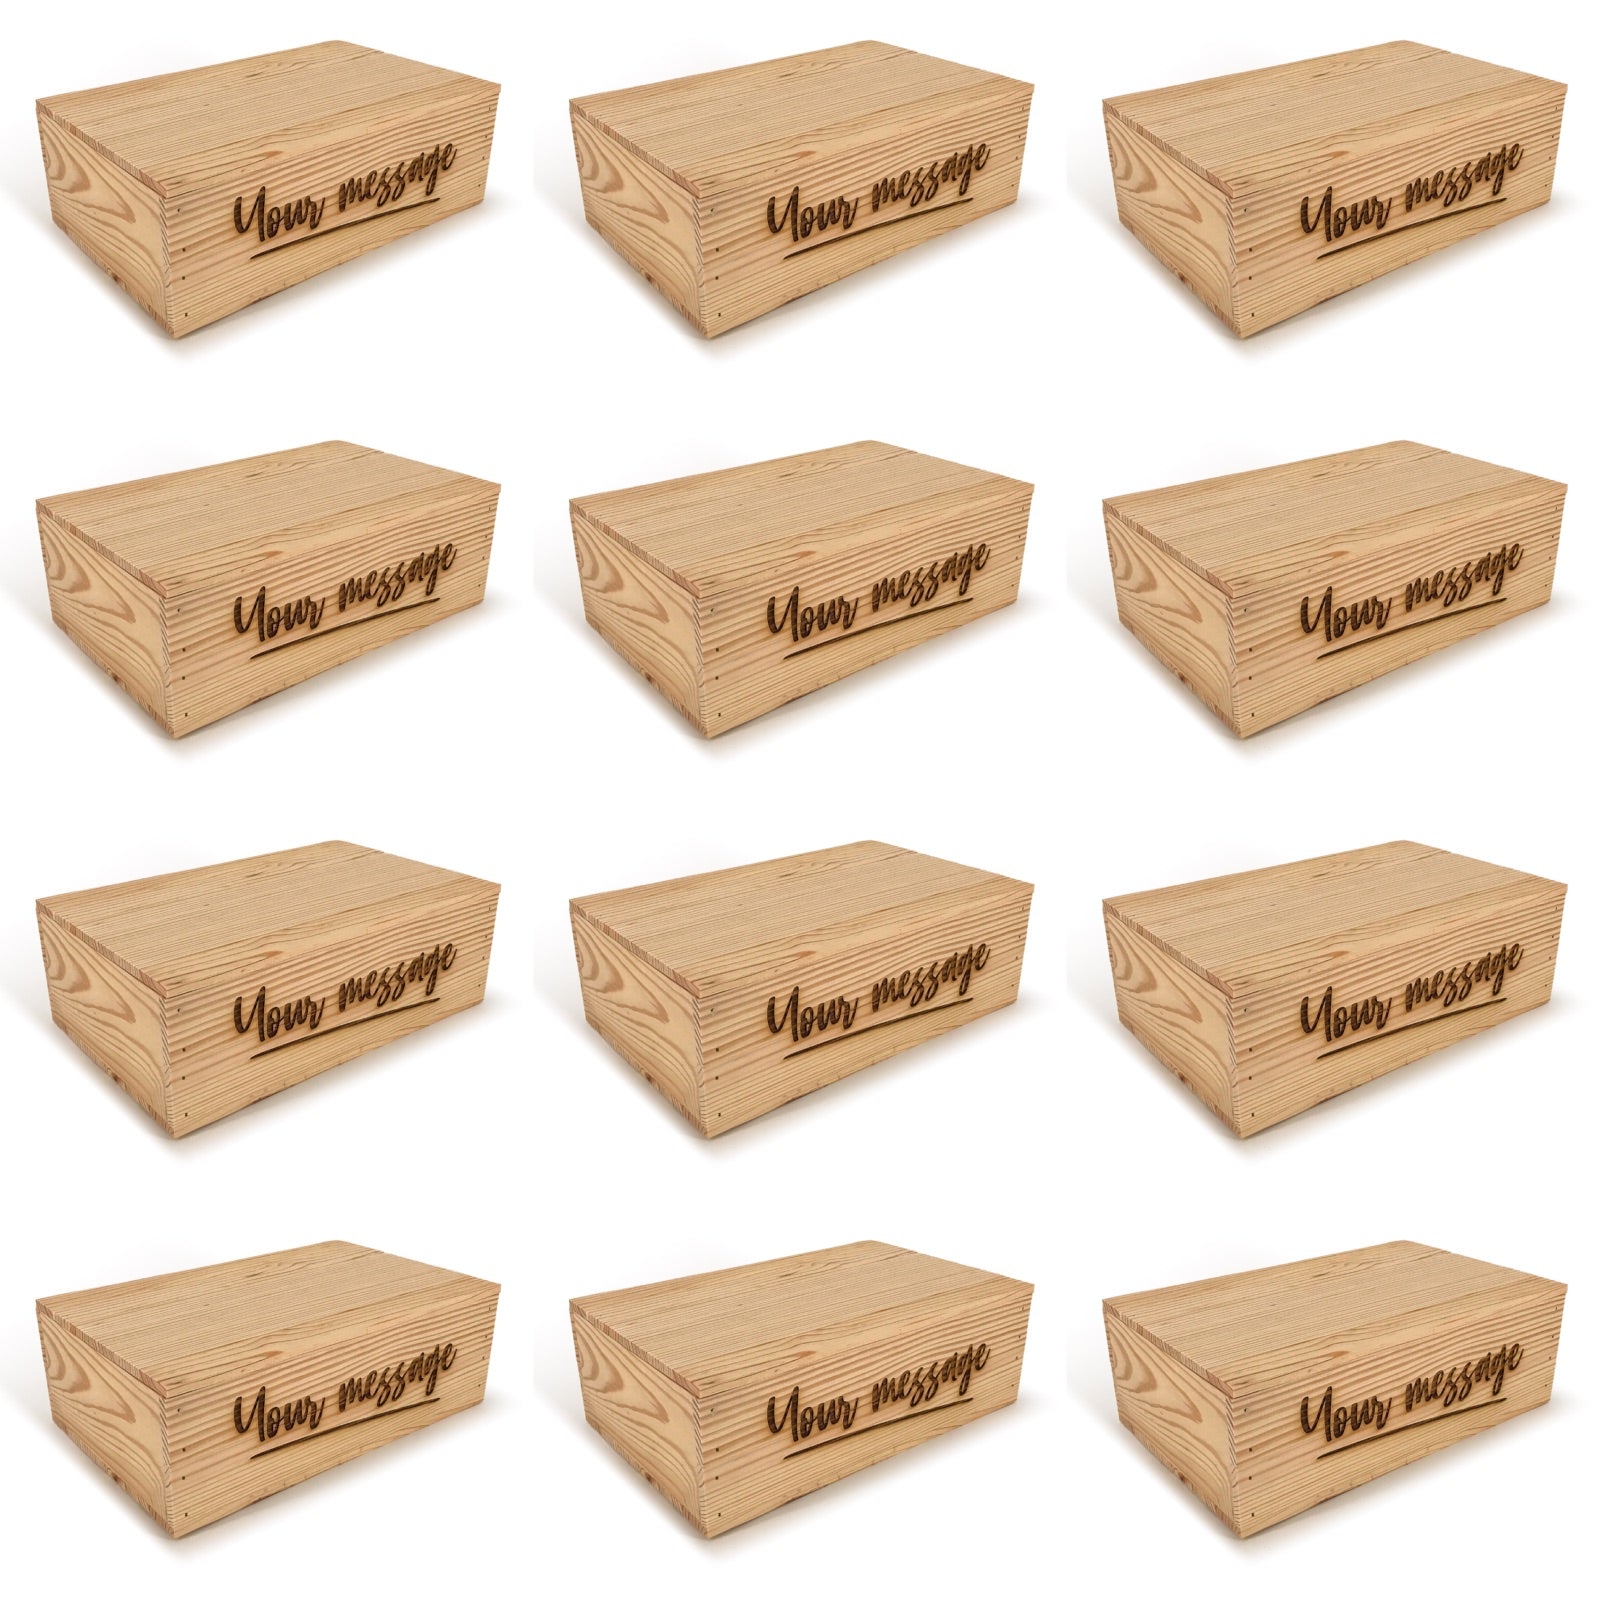 12 Two Bottle Wine Crate Boxes with Lid and Custom Message 14x9x4.5, 6-WB-14-9-4.5-ST-NW-LL,  12-WB-14-9-4.5-ST-NW-LL,  24-WB-14-9-4.5-ST-NW-LL,  48-WB-14-9-4.5-ST-NW-LL,  96-WB-14-9-4.5-ST-NW-LL